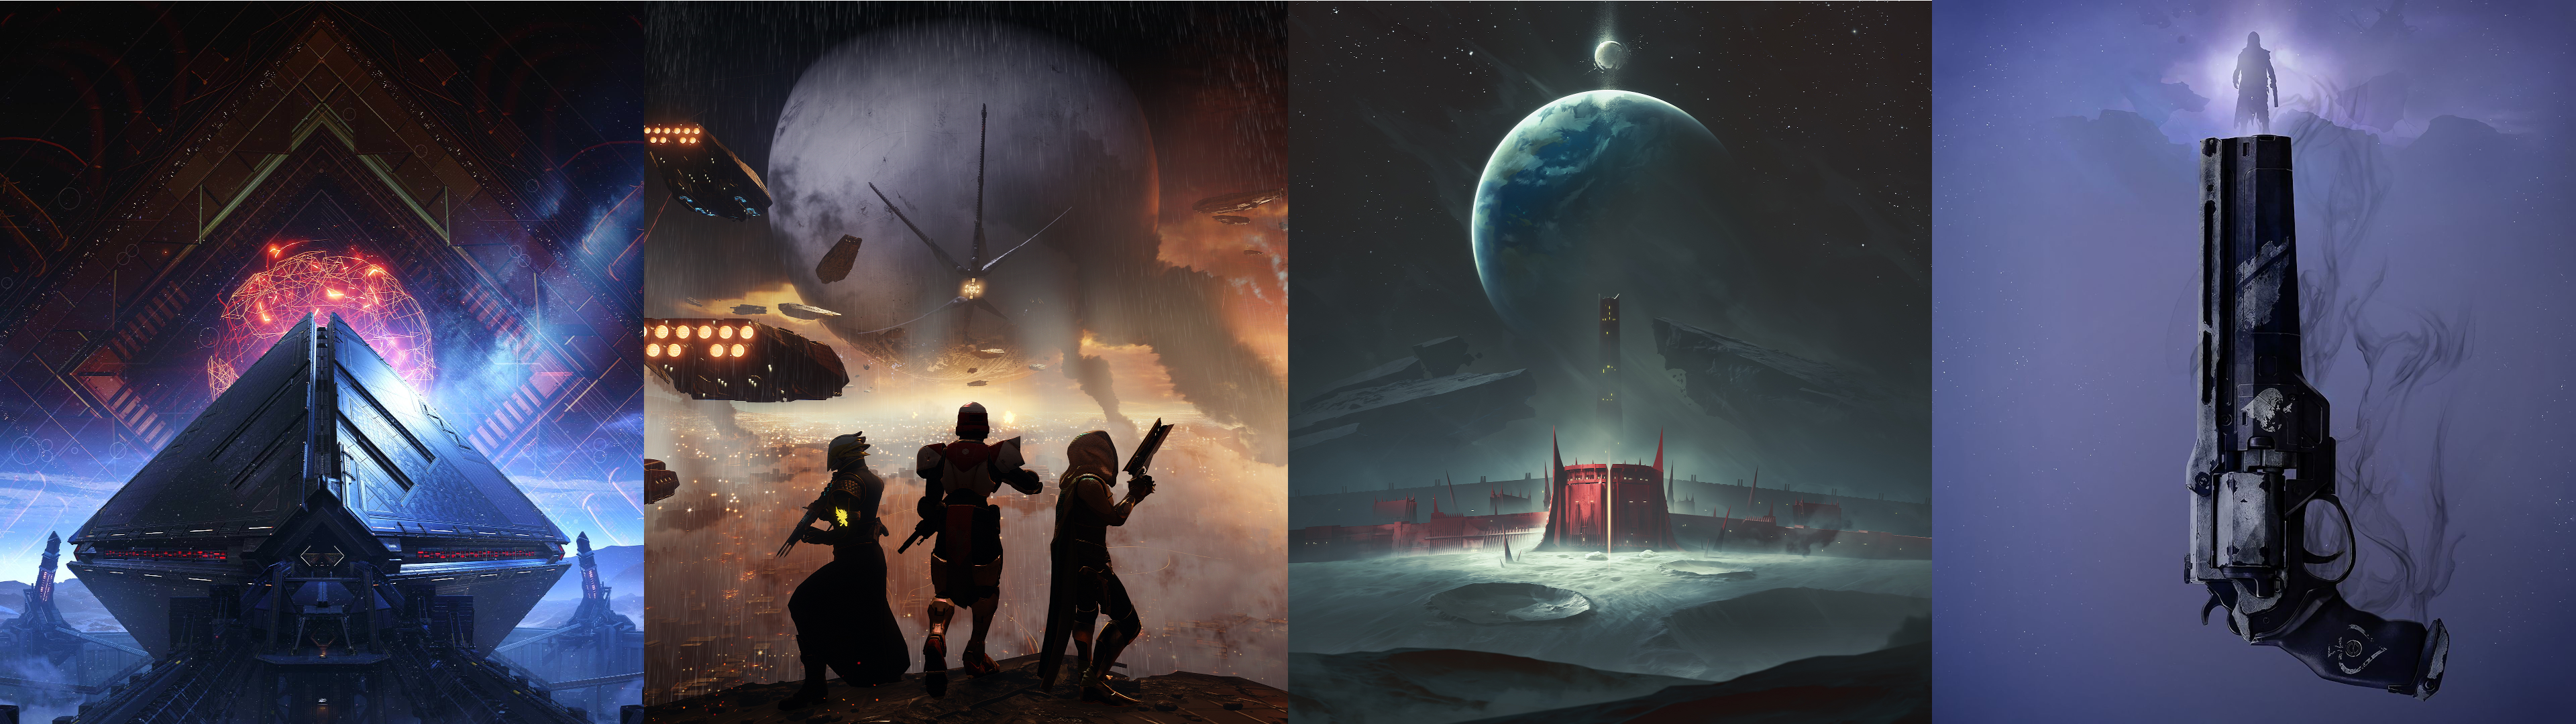 Destiny 2 Dual Monitor Wallpapers